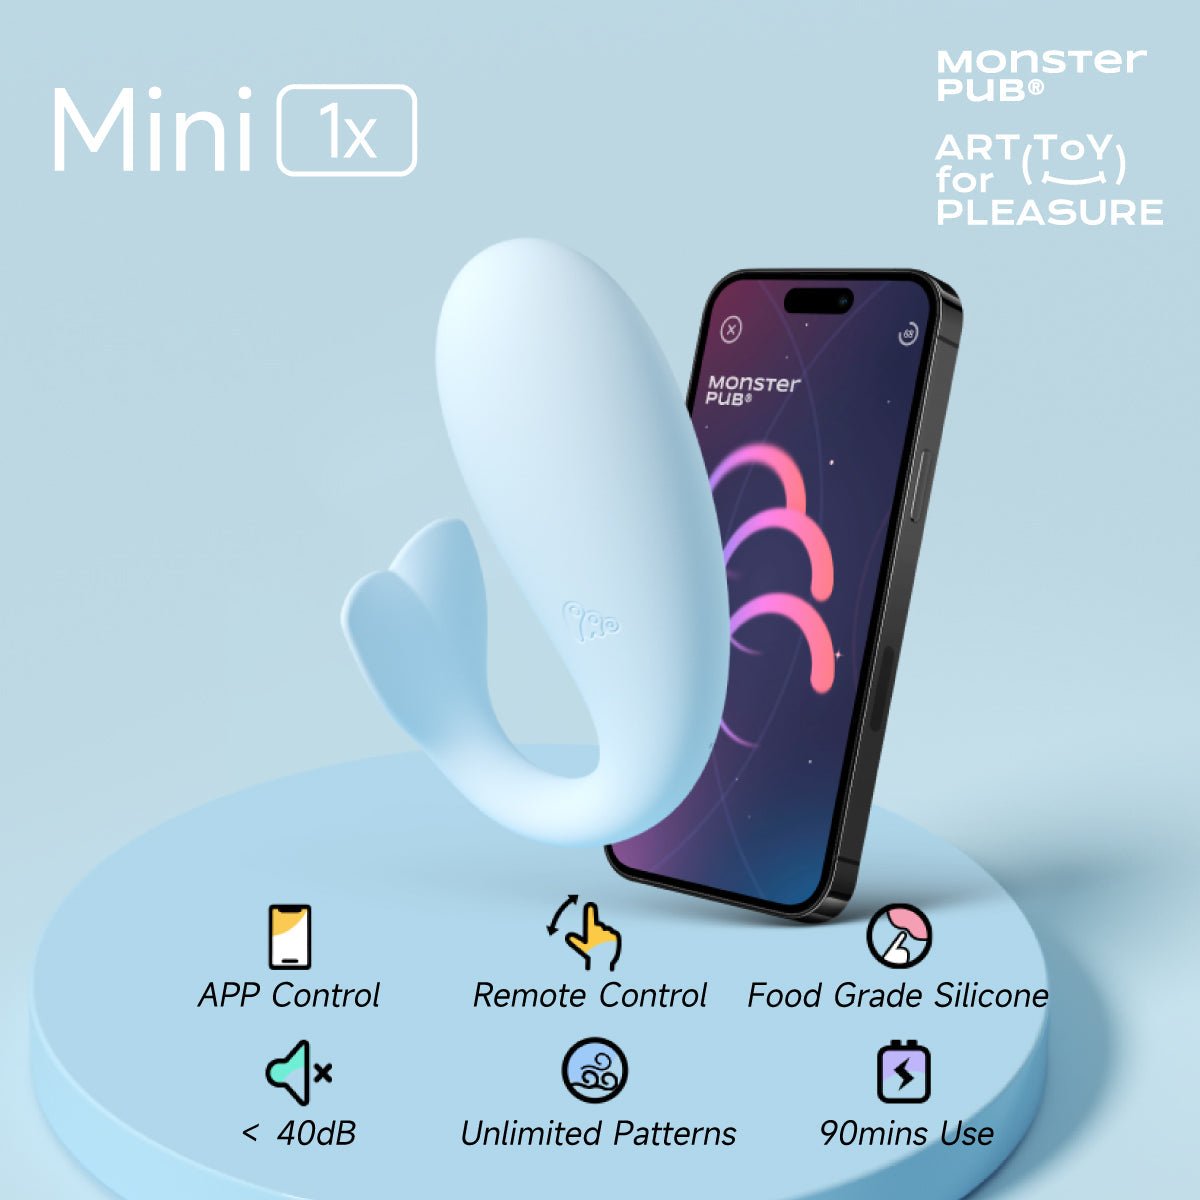 Monster Pub Excited Version Wireless Bluetooth Remote Fun Play Sex Toy App-Controlled & Hands-Free Panty Vibrator